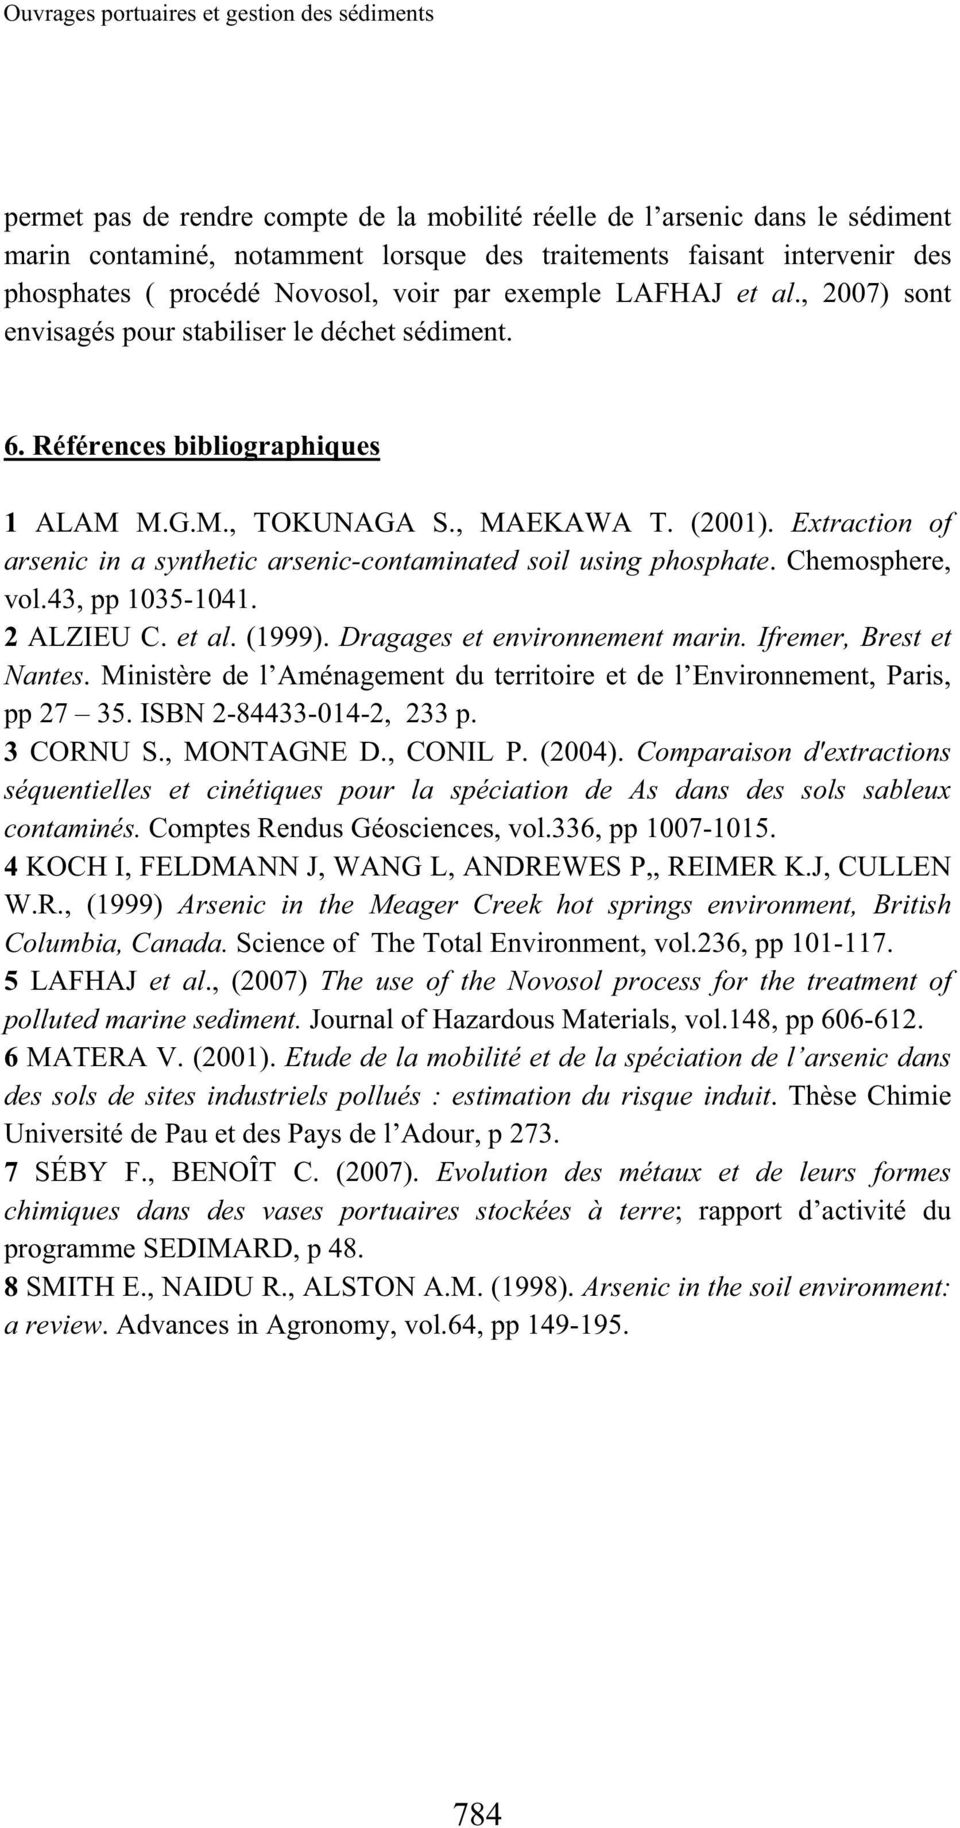 Extraction of arsenic in a synthetic arsenic-contaminated soil using phosphate. Chemosphere, vol.43, pp 135-141. 2 ALZIEU C. et al. (1999). Dragages et environnement marin. Ifremer, Brest et Nantes.